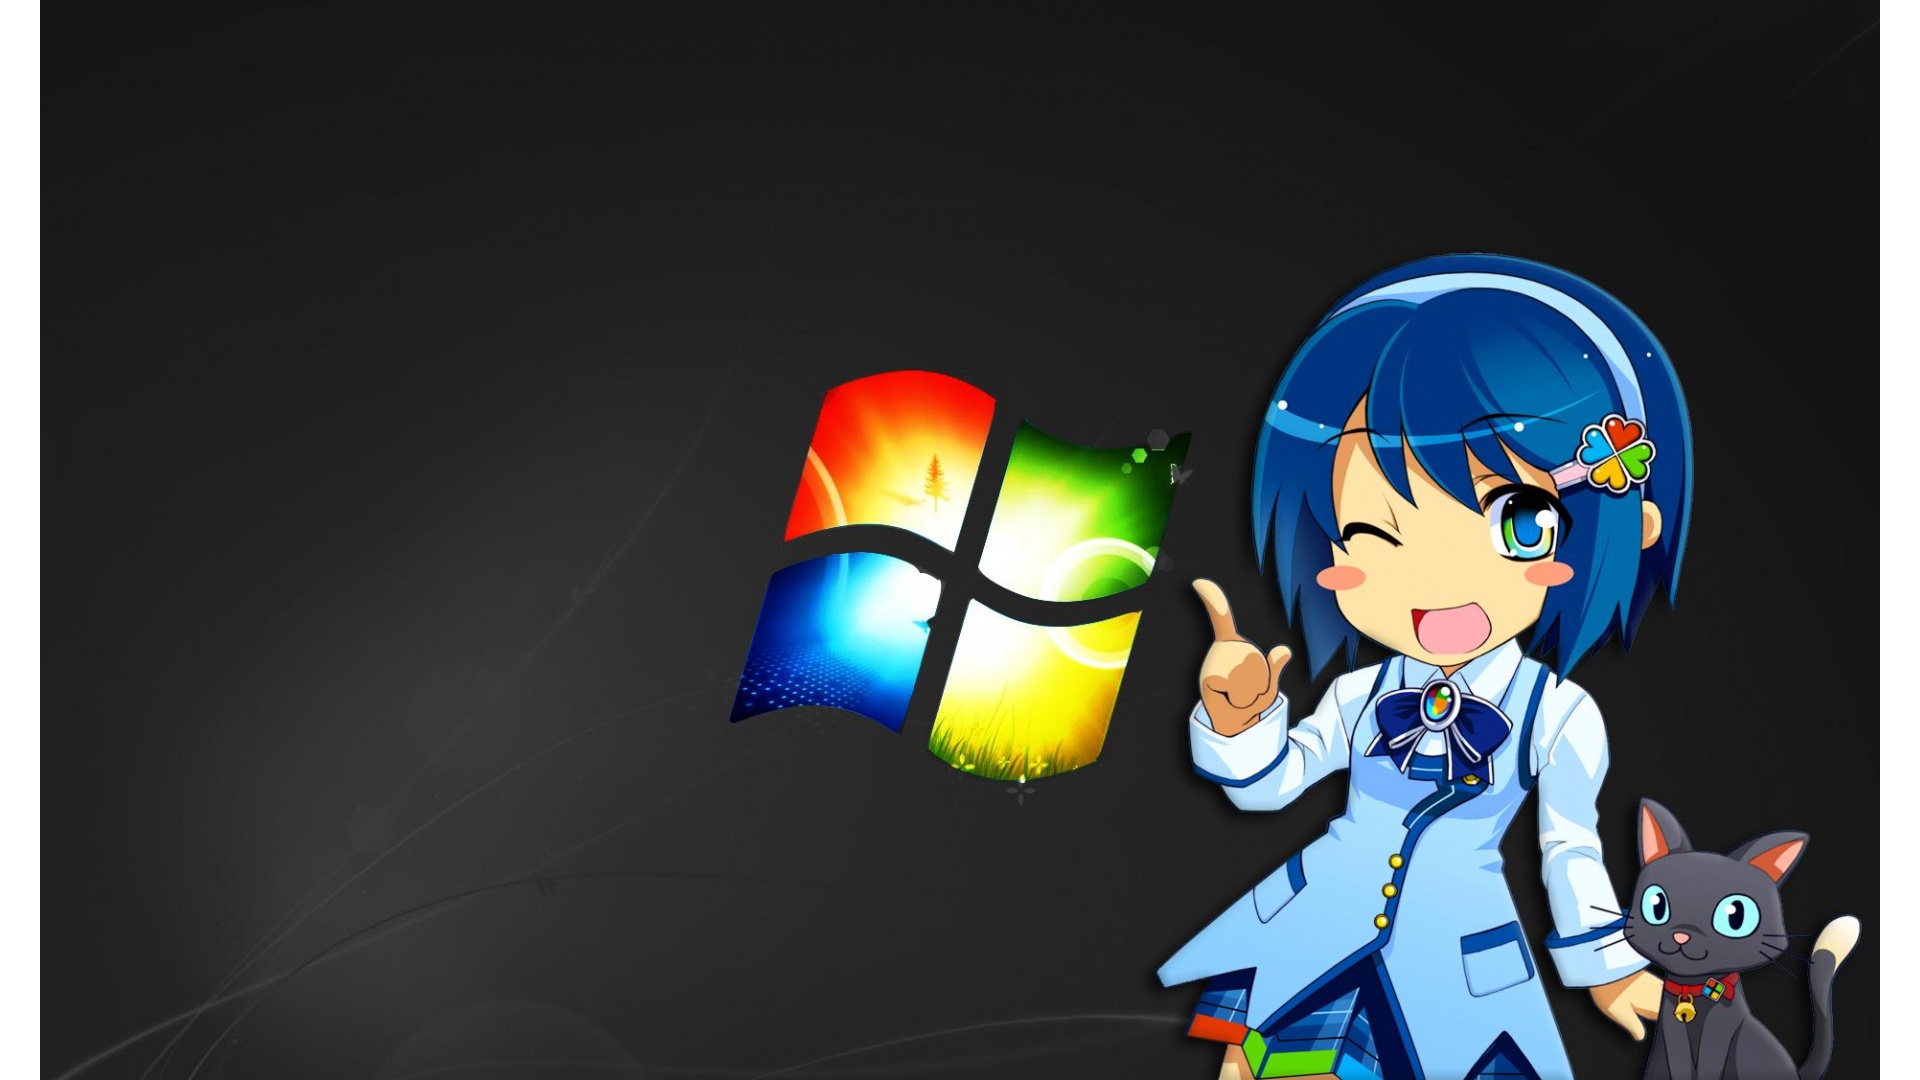 Free Download Anime Windows Girl 19 X 1080 Download Close 19x1080 For Your Desktop Mobile Tablet Explore 39 Windows 10 Girl Wallpaper Best Windows 10 Wallpaper 15 Anime Wallpaper Windows Girl Video Wallpapers Windows 10